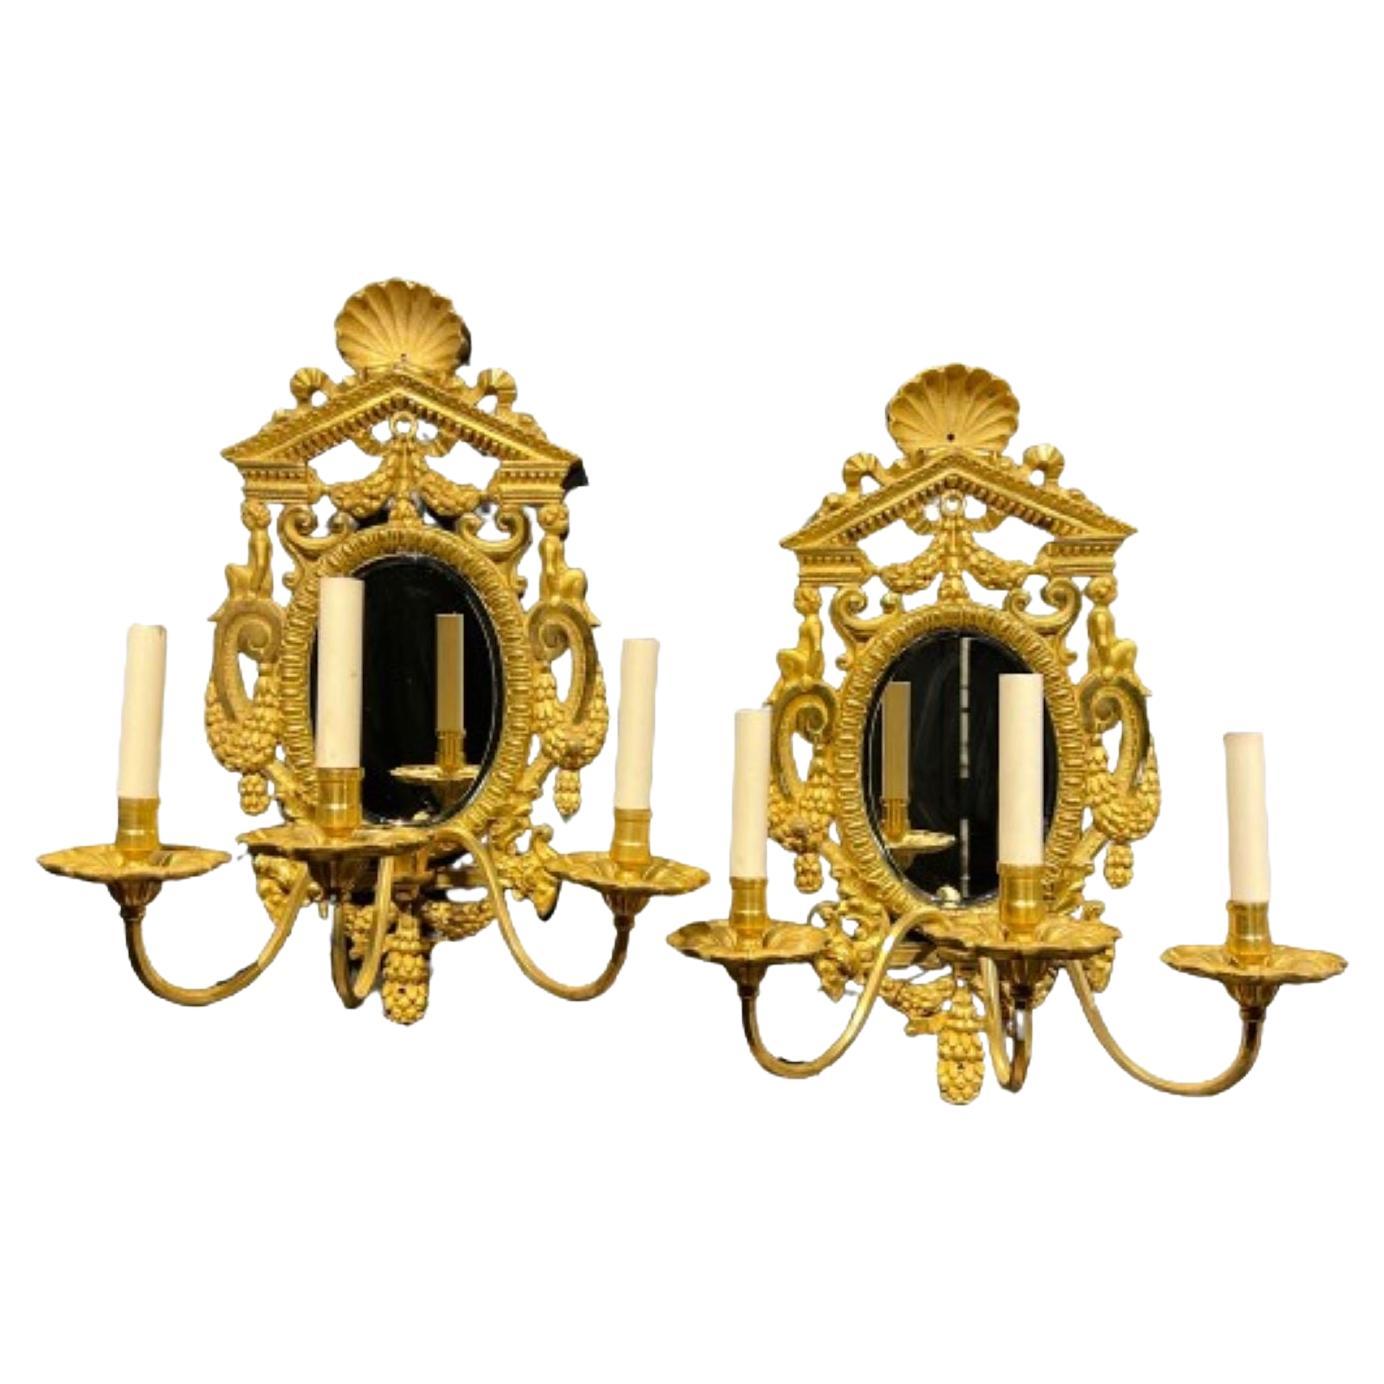 1900's Caldwell Neoclassic Gilt Bronze and Mirror Sconces 3 Lights For Sale